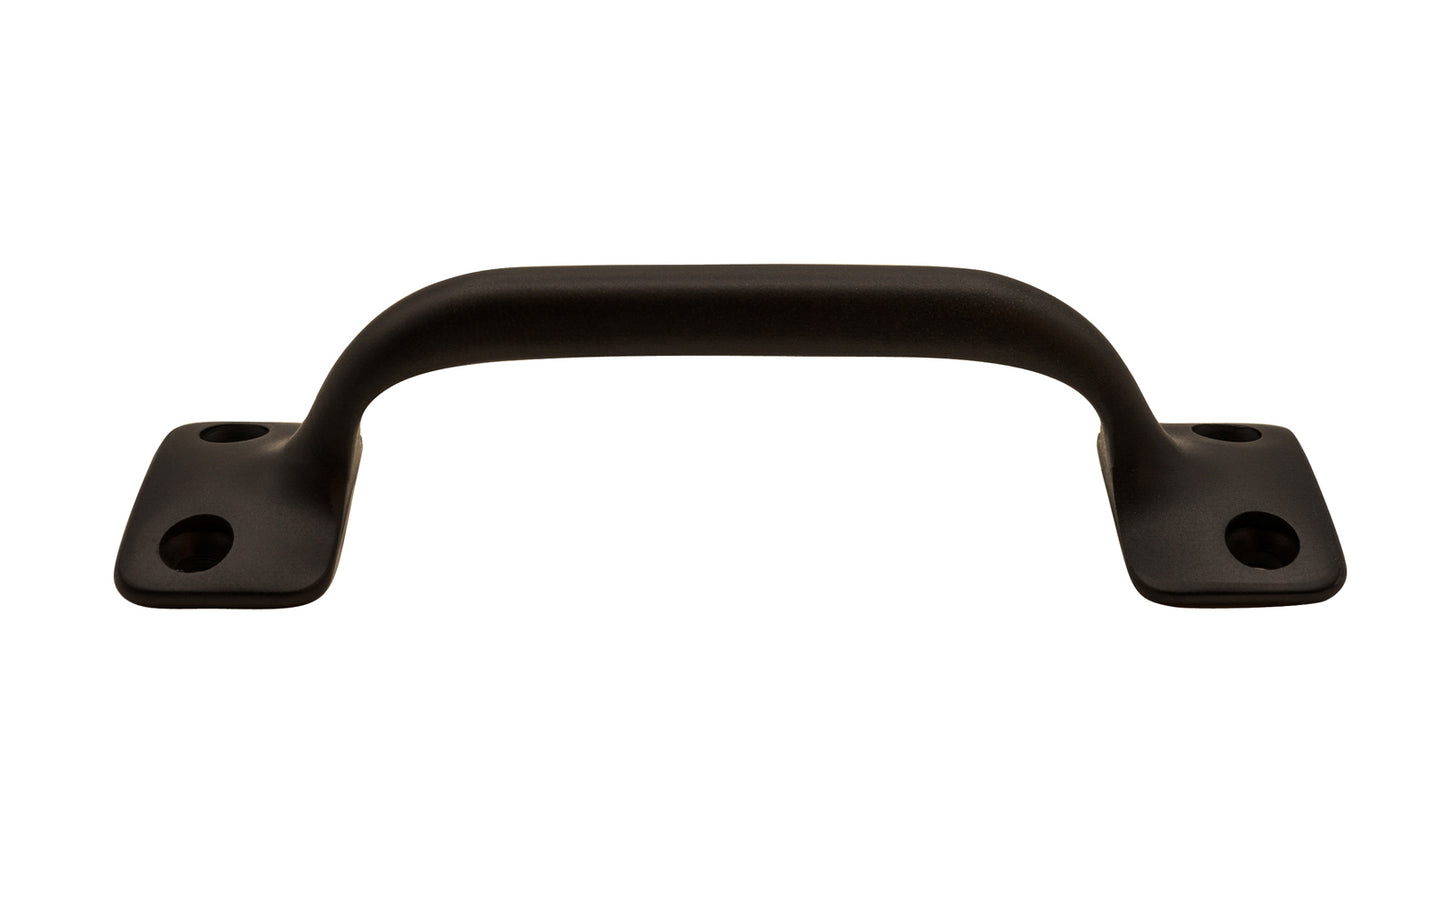 Vintage-style Hardware · Classic Solid Brass Handle Pull ~ 3-1/2" On Centers. Versatile handle is great for sash windows, cabinets, drawers, file cabinets. Arts & Crafts handle pull. Oil Rubbed Bronze finish.